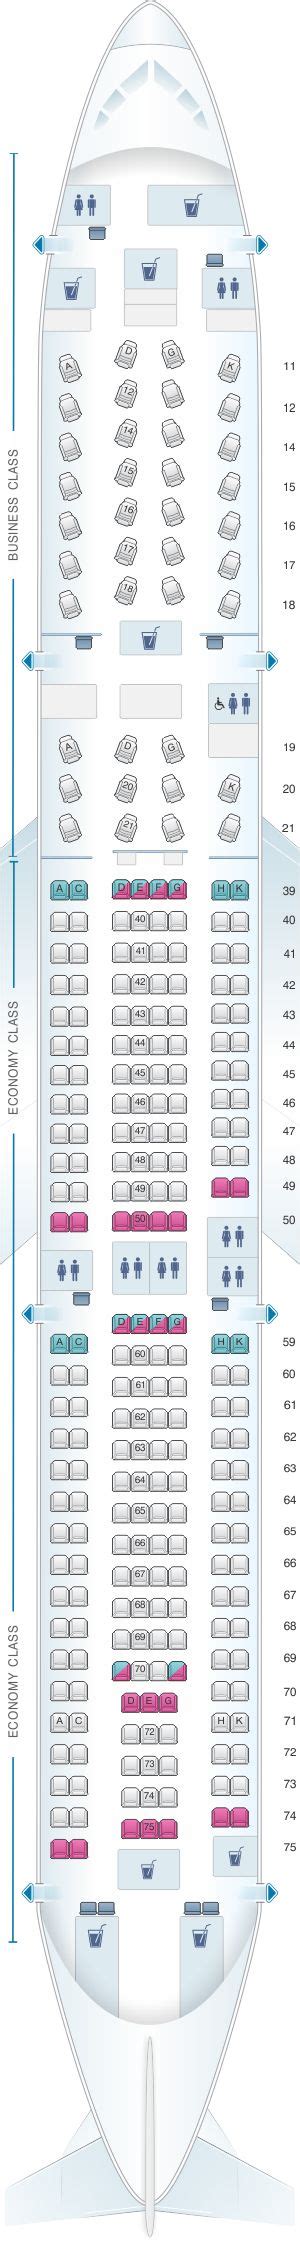 Seat Map Cathay Pacific Airways Airbus A330 300 33e Cathay Pacific